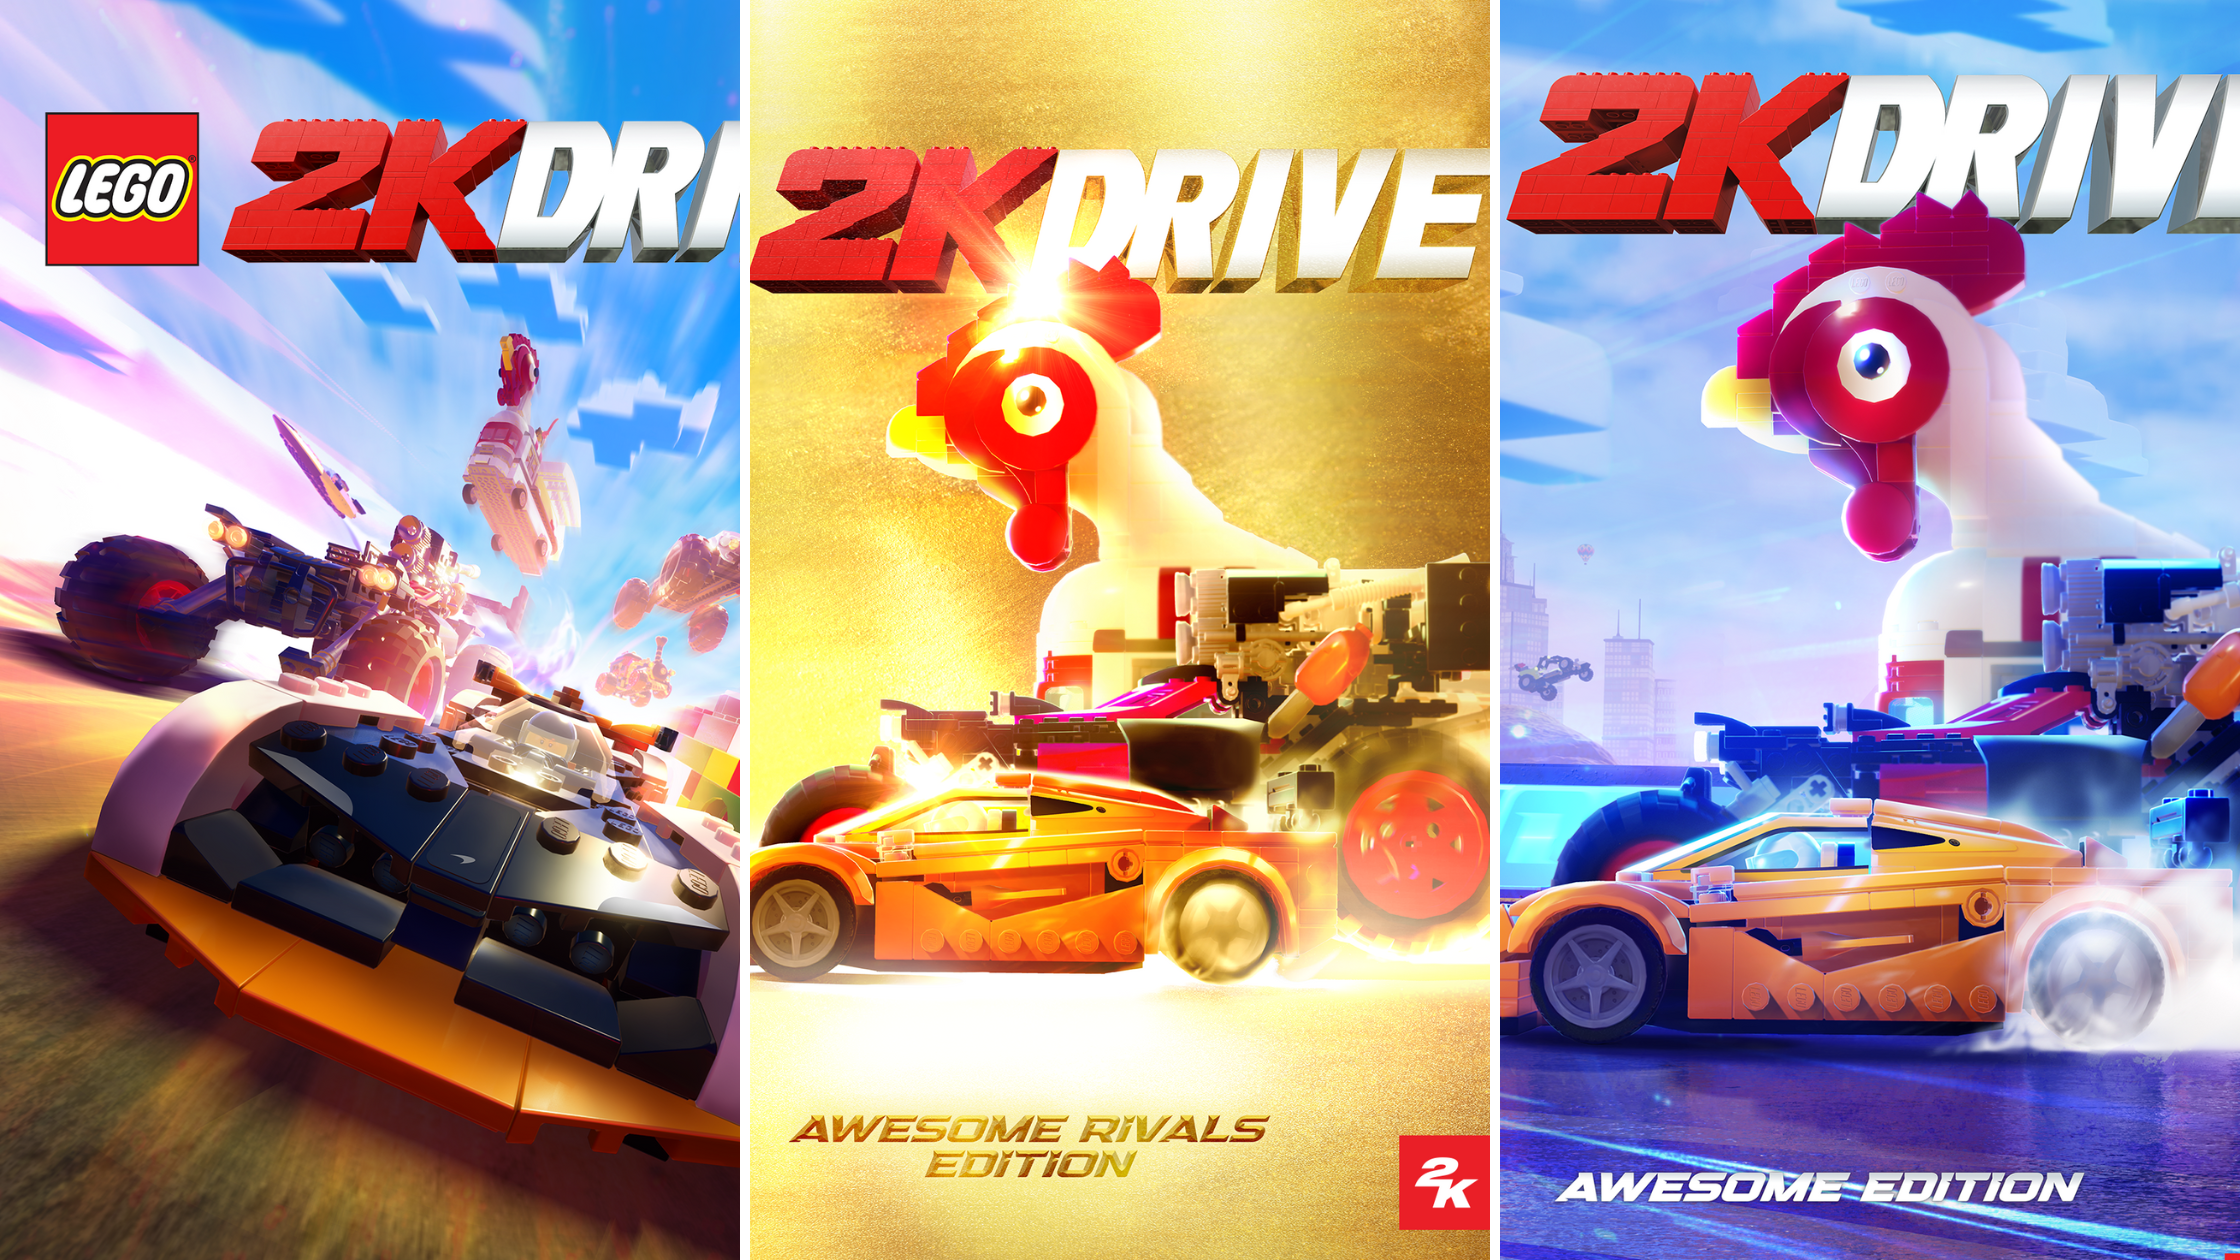 LEGO 2K Drive looks slick but sets a dangerous and predatory course towards  microtransaction hell - Jay's Brick Blog